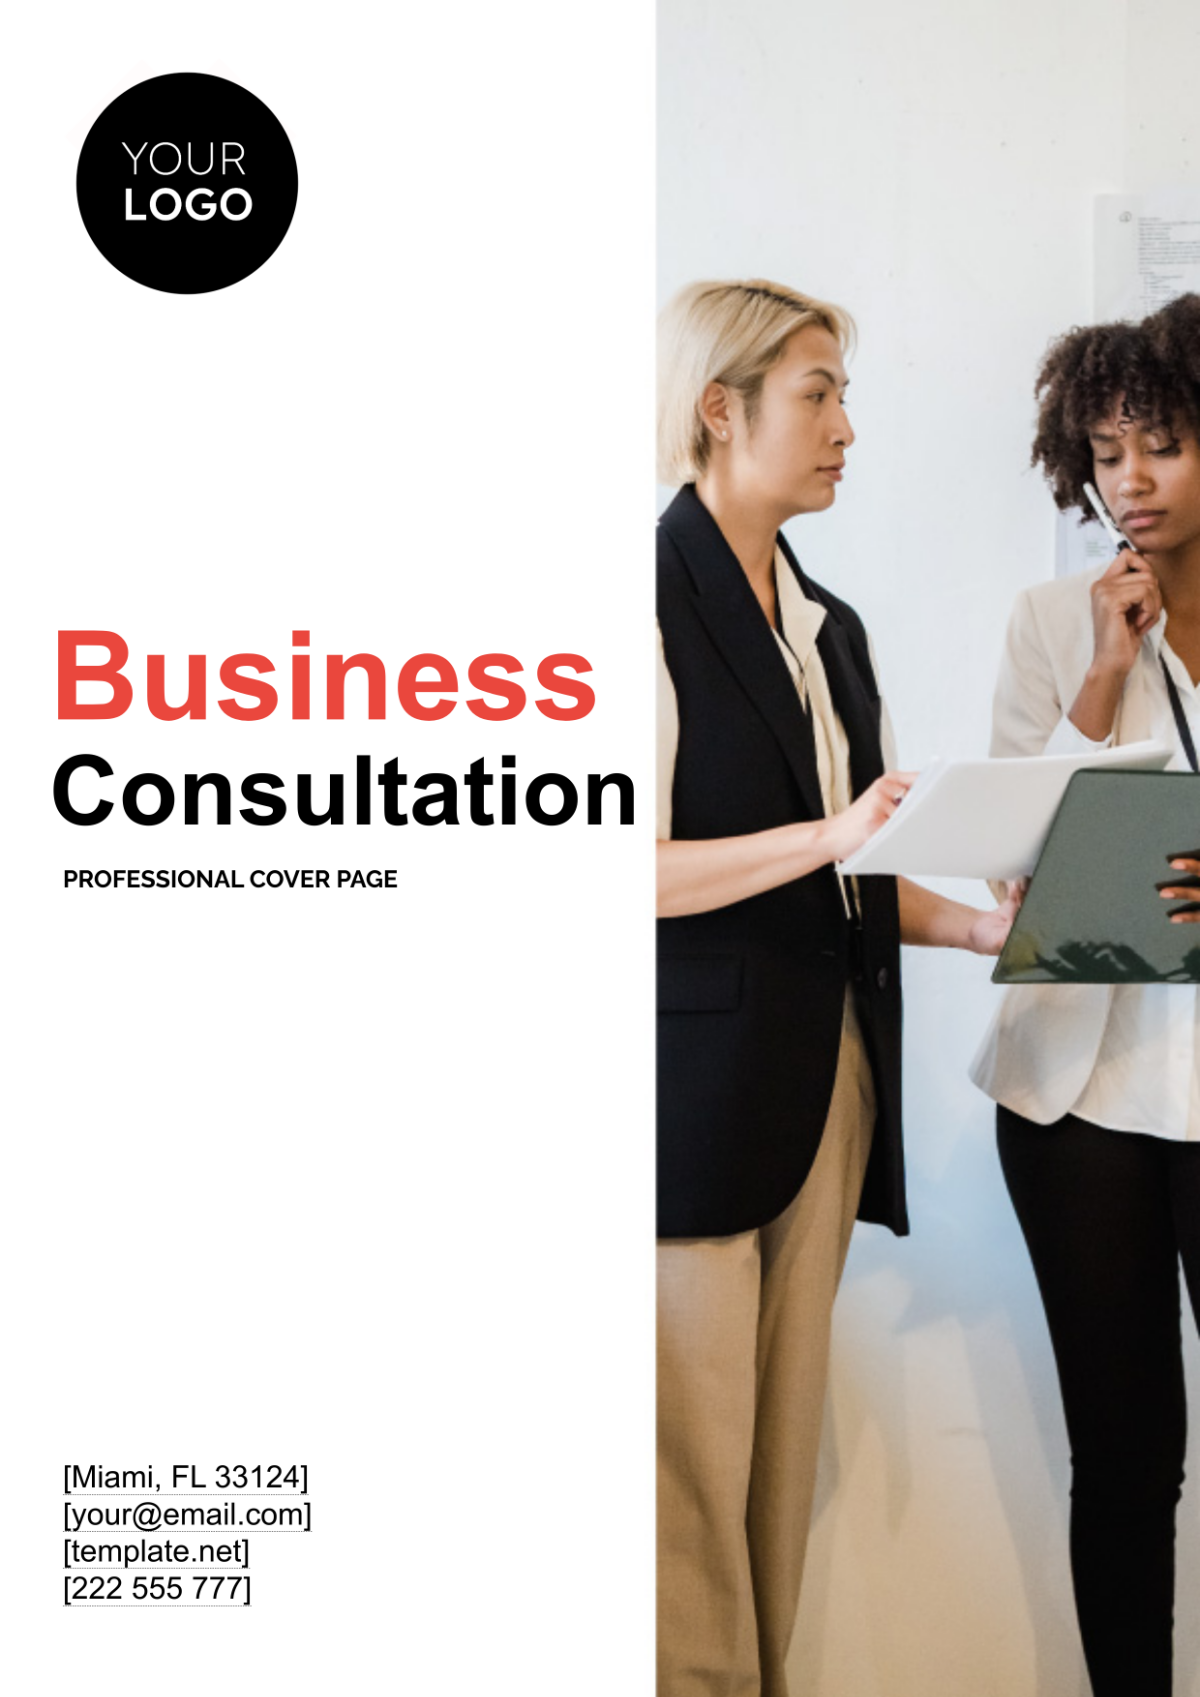 Business Consultation Professional Cover Page